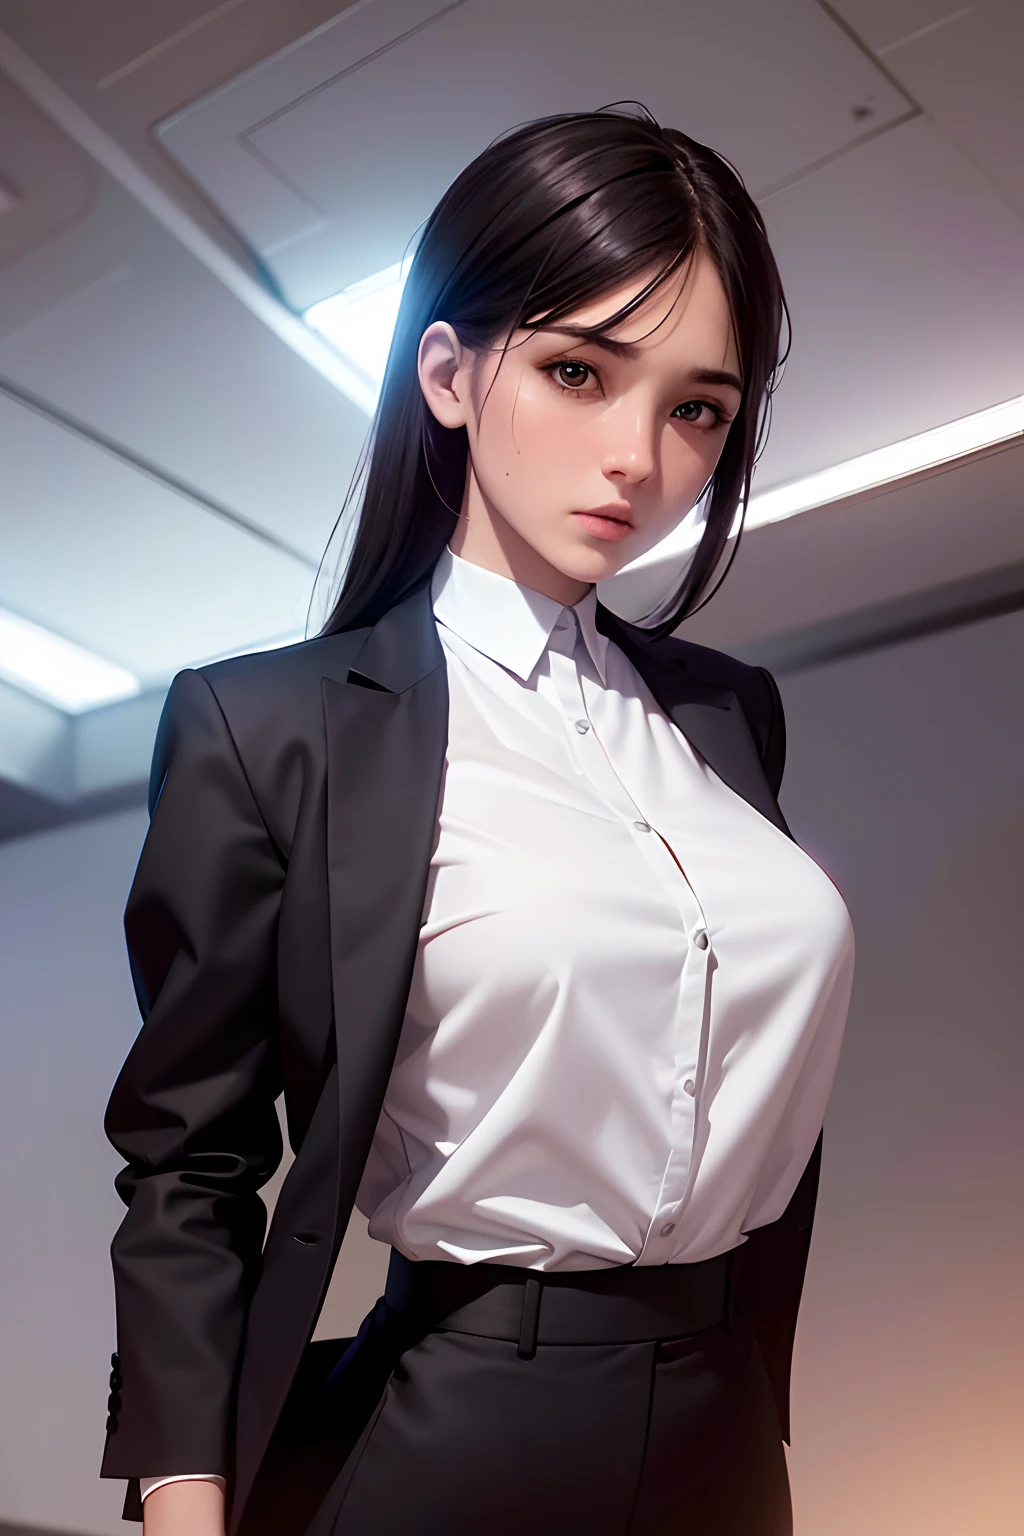 16K, HDR, RTX, raytracing, natural lighting, absurdres, best qaulity masterpiece, perfect anatomy highly detailed face, detailed eyes, 1girl, solo, wearing a business suit, white shirt, top button open, beautiful dark hair, extremely beautiful, edgy, cool, evil aura, windy, glowing eyes, serious expressions, dystopian city, futuristic, detailed background, award winning, neon lights, trending on art station